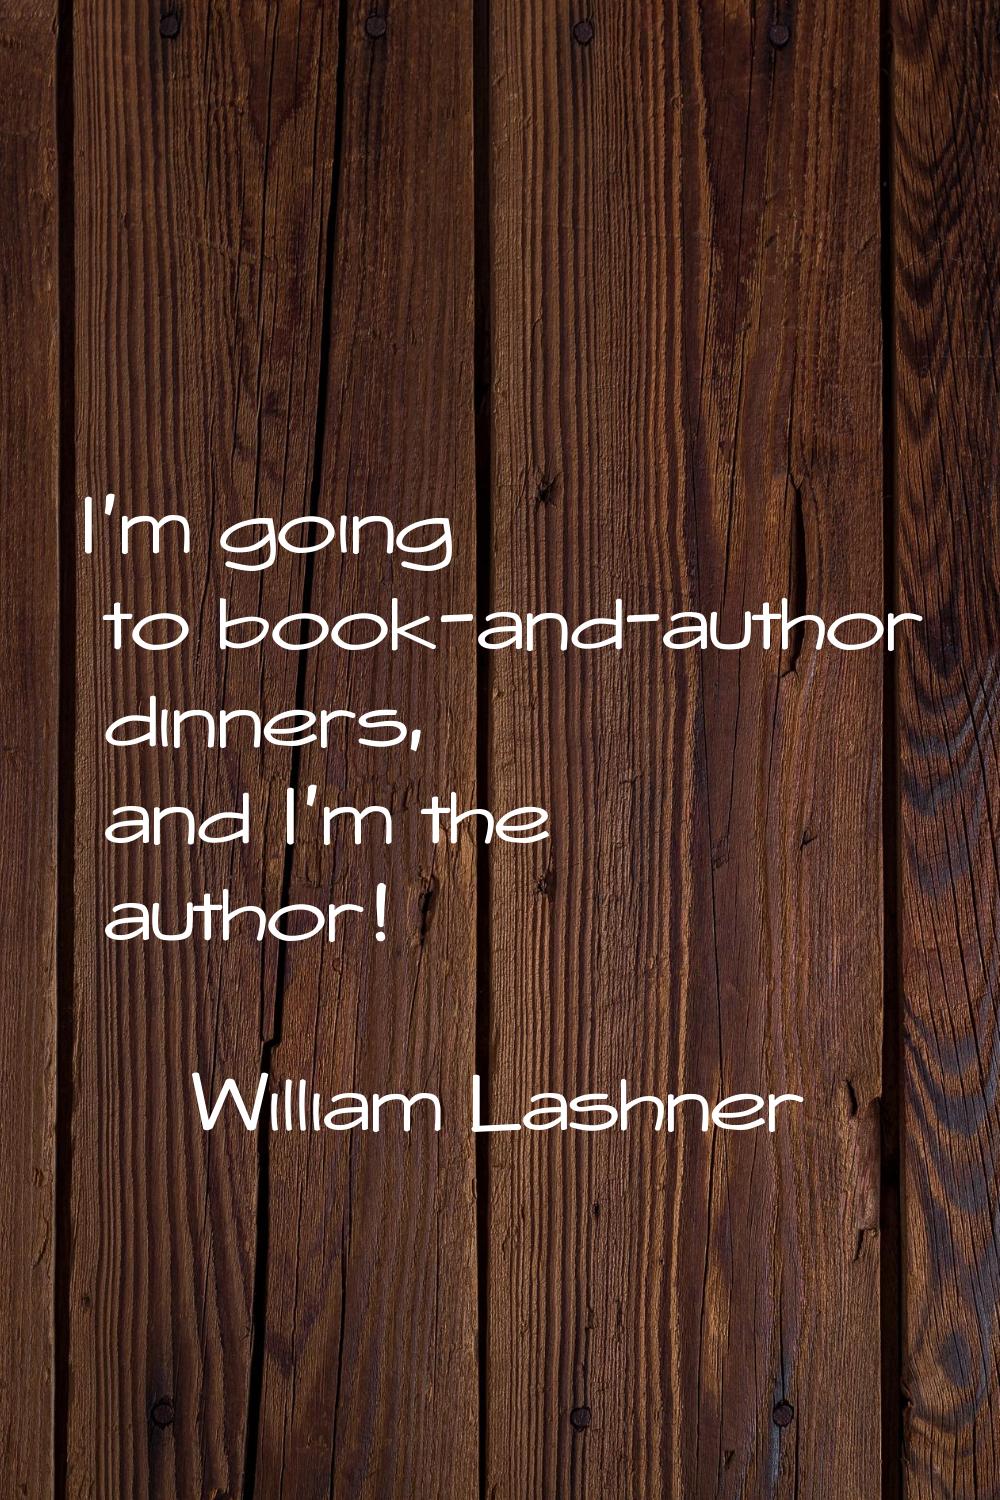 I'm going to book-and-author dinners, and I'm the author!